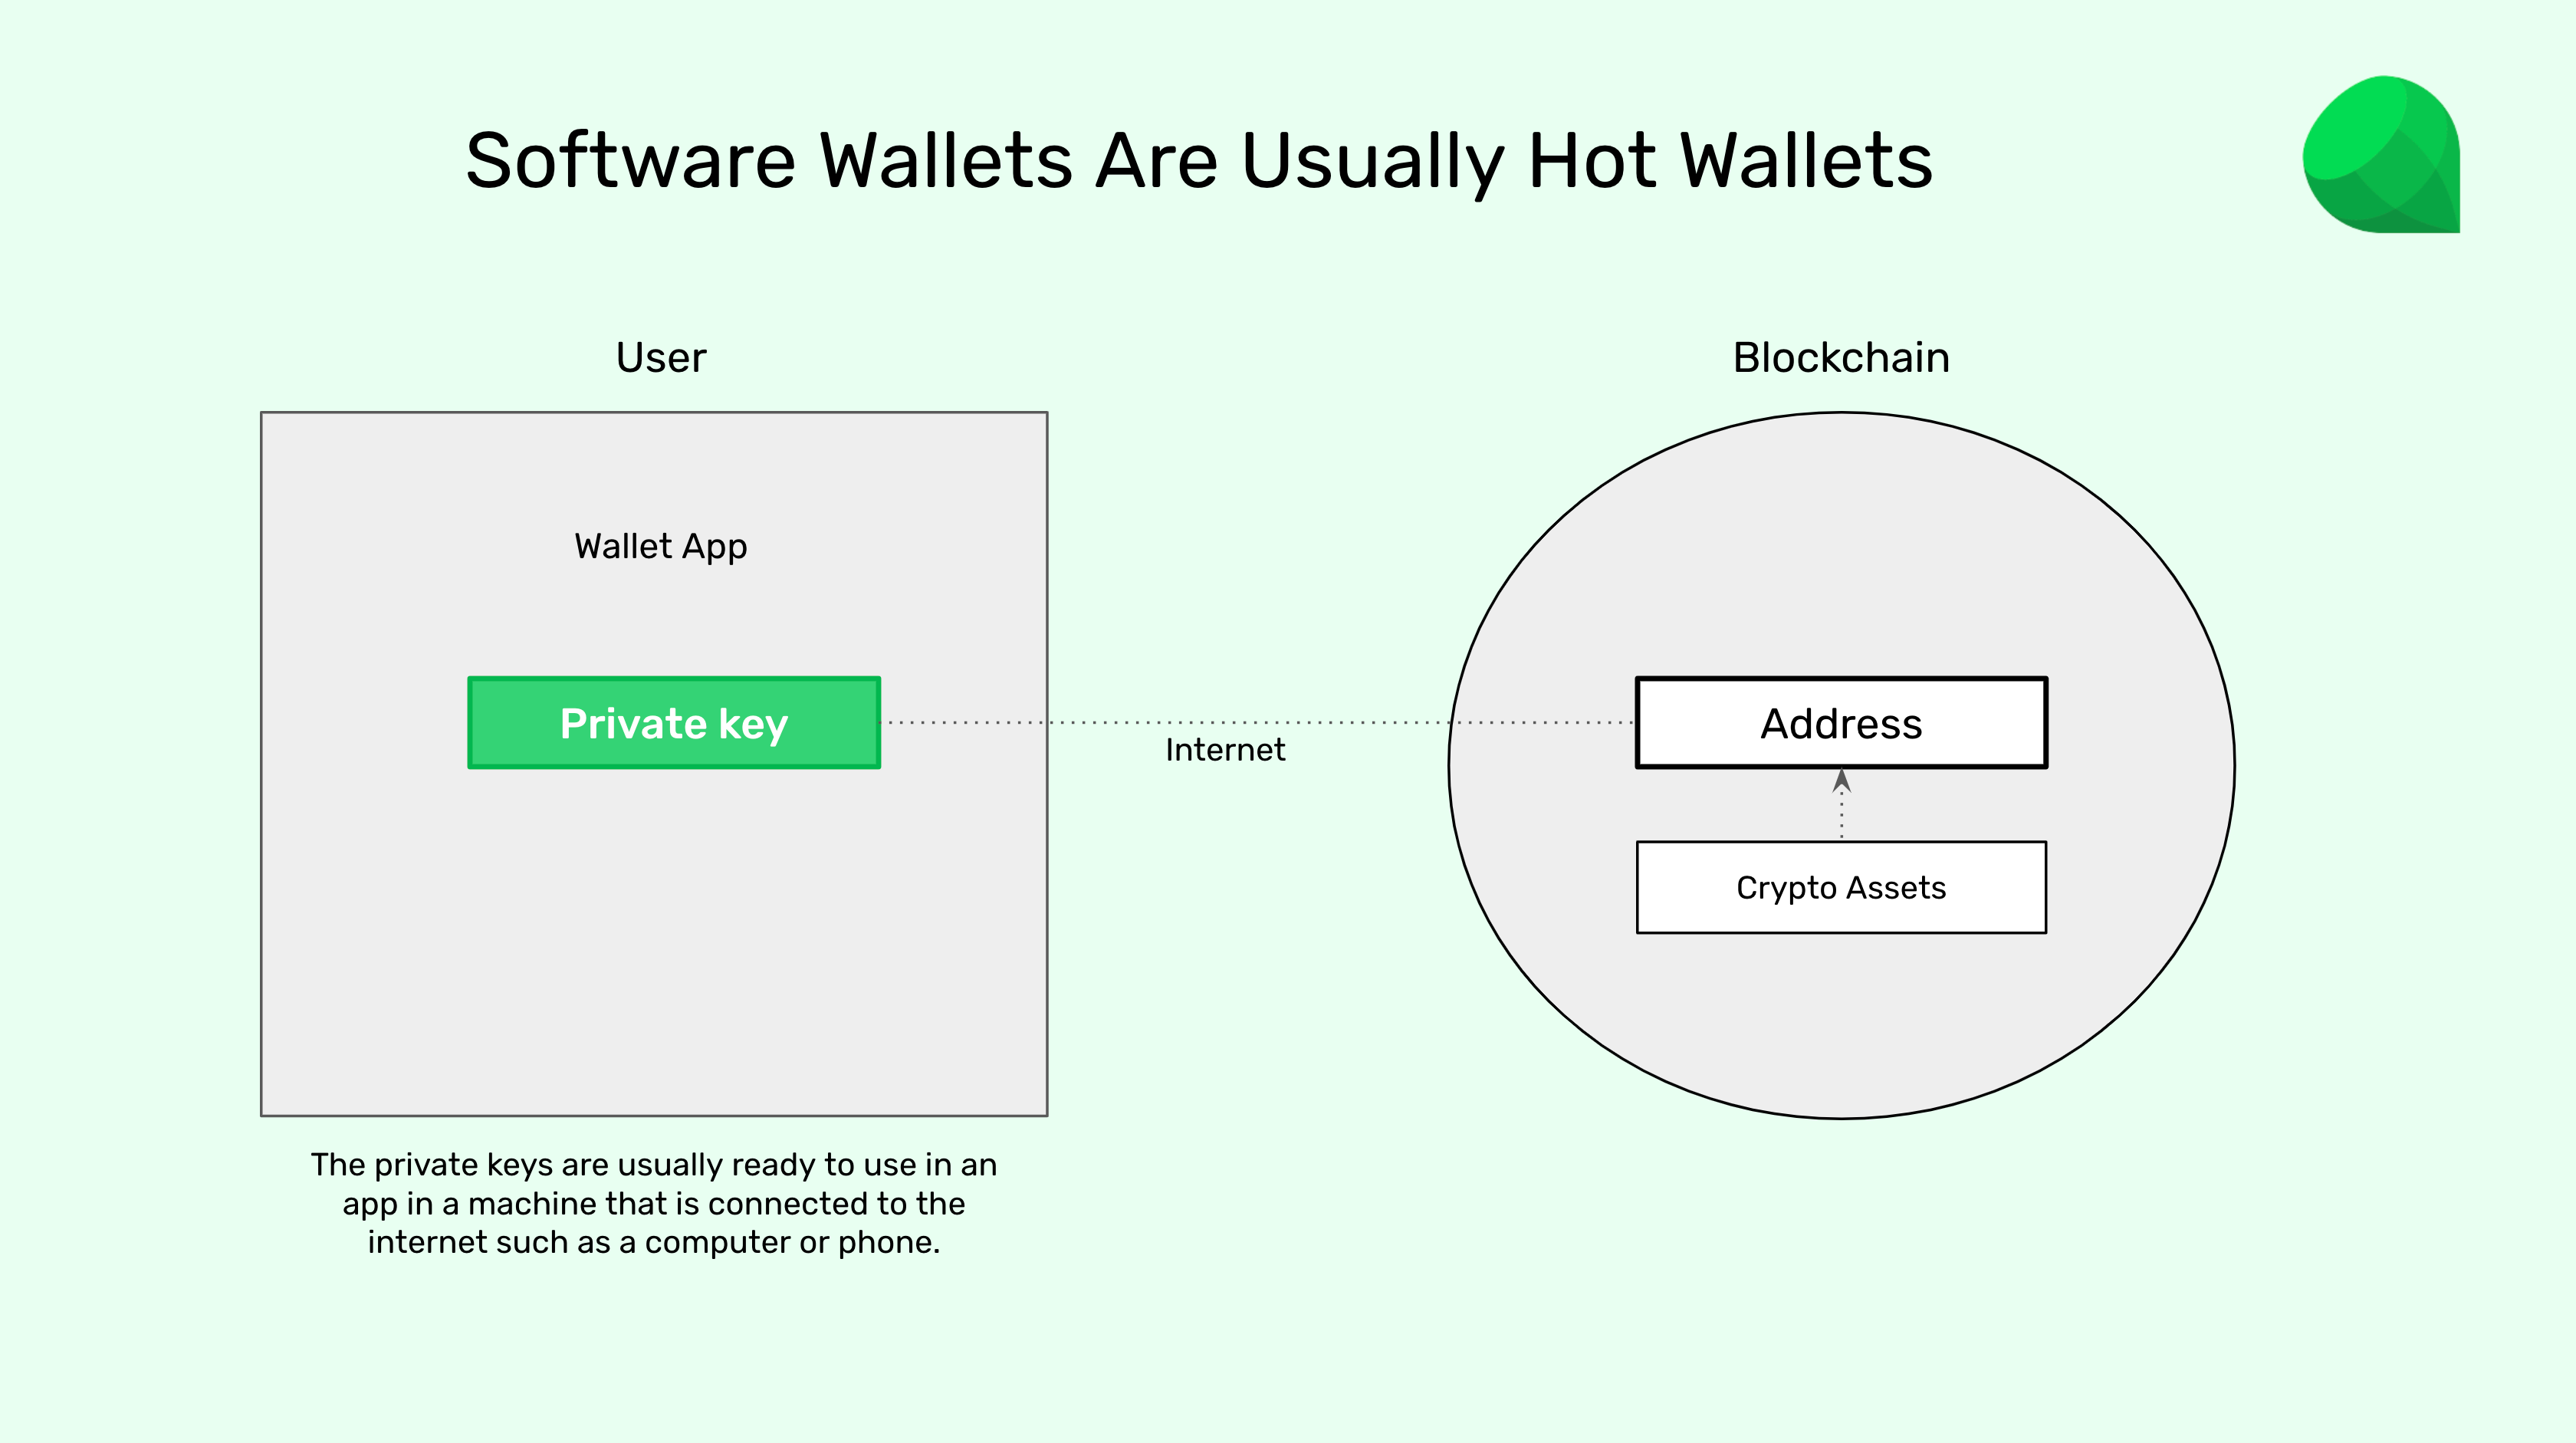 Software wallets are usually hot wallets?